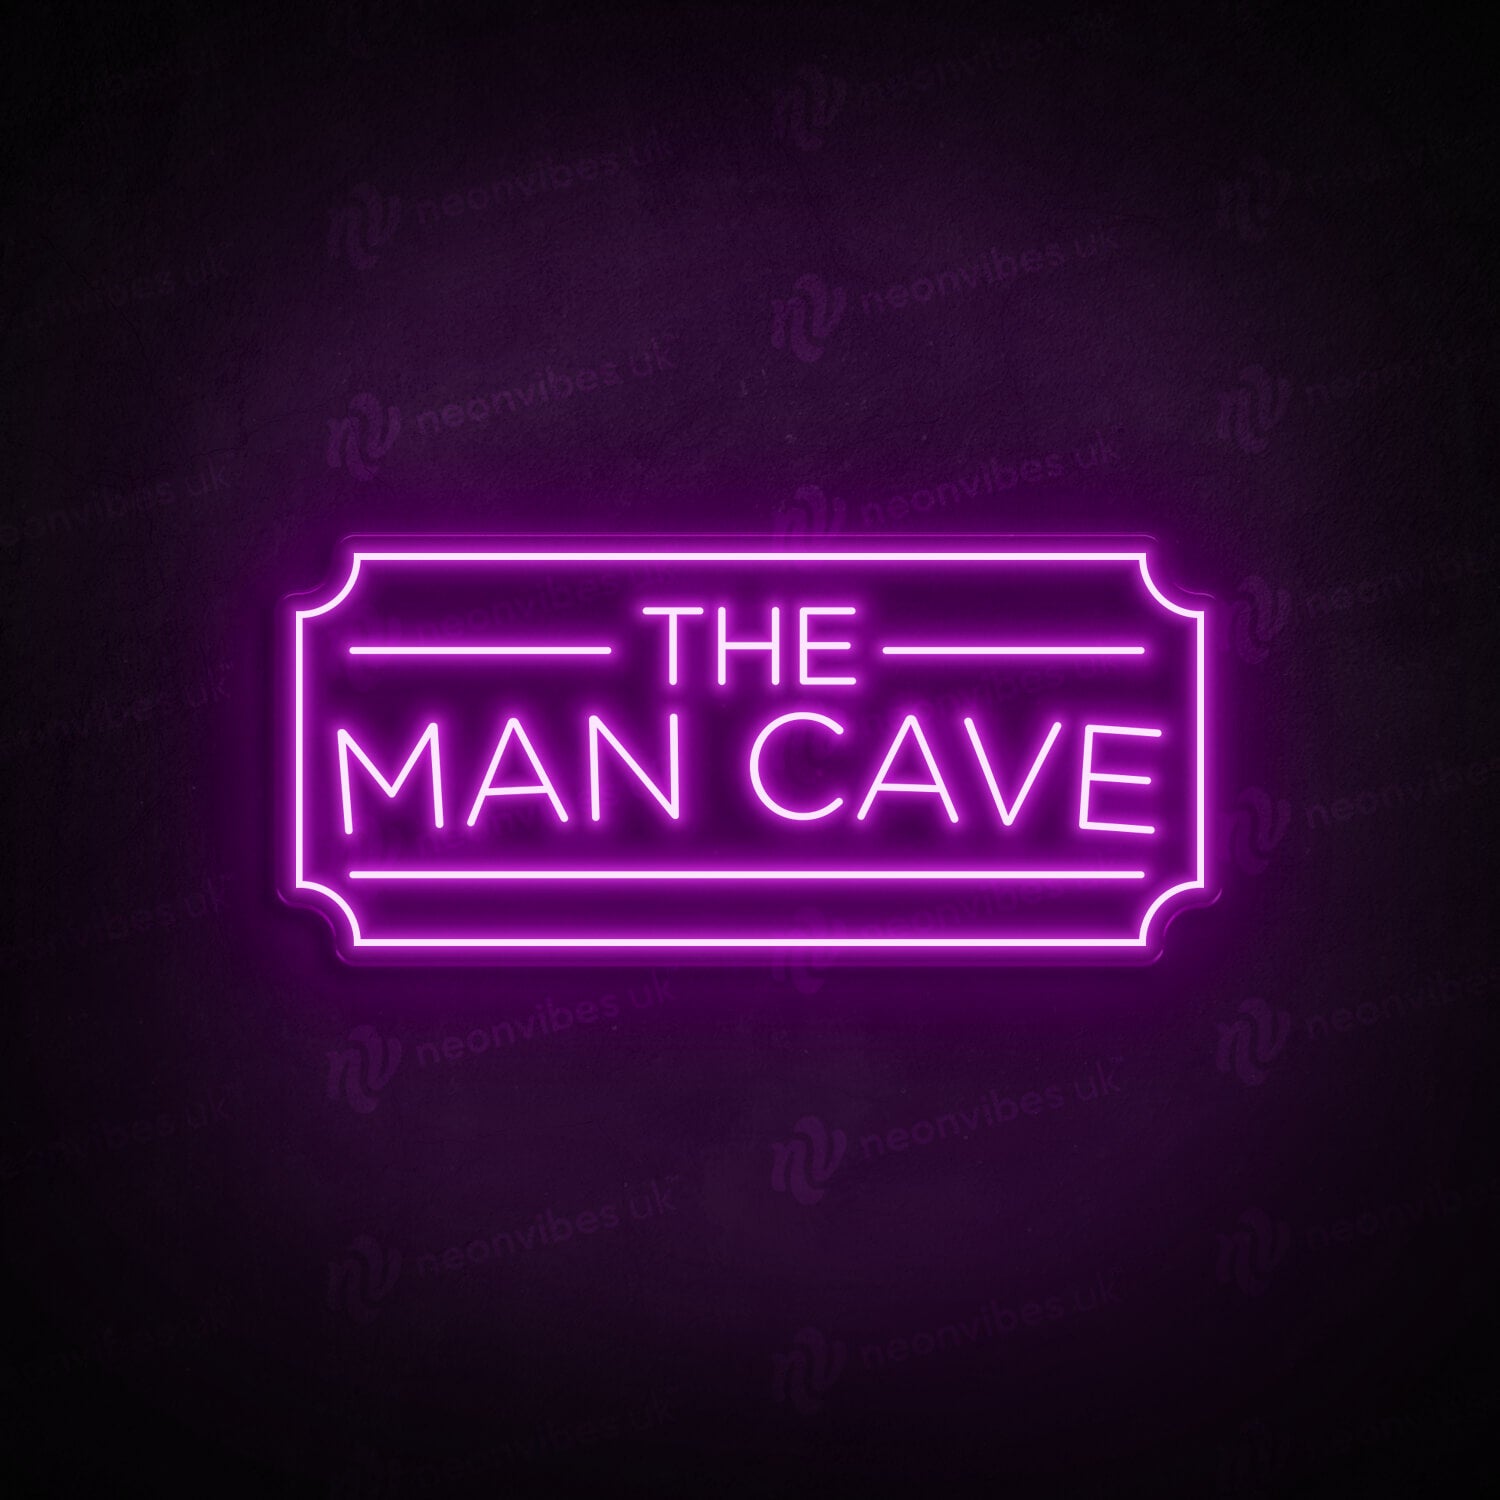 Man Cave neon sign